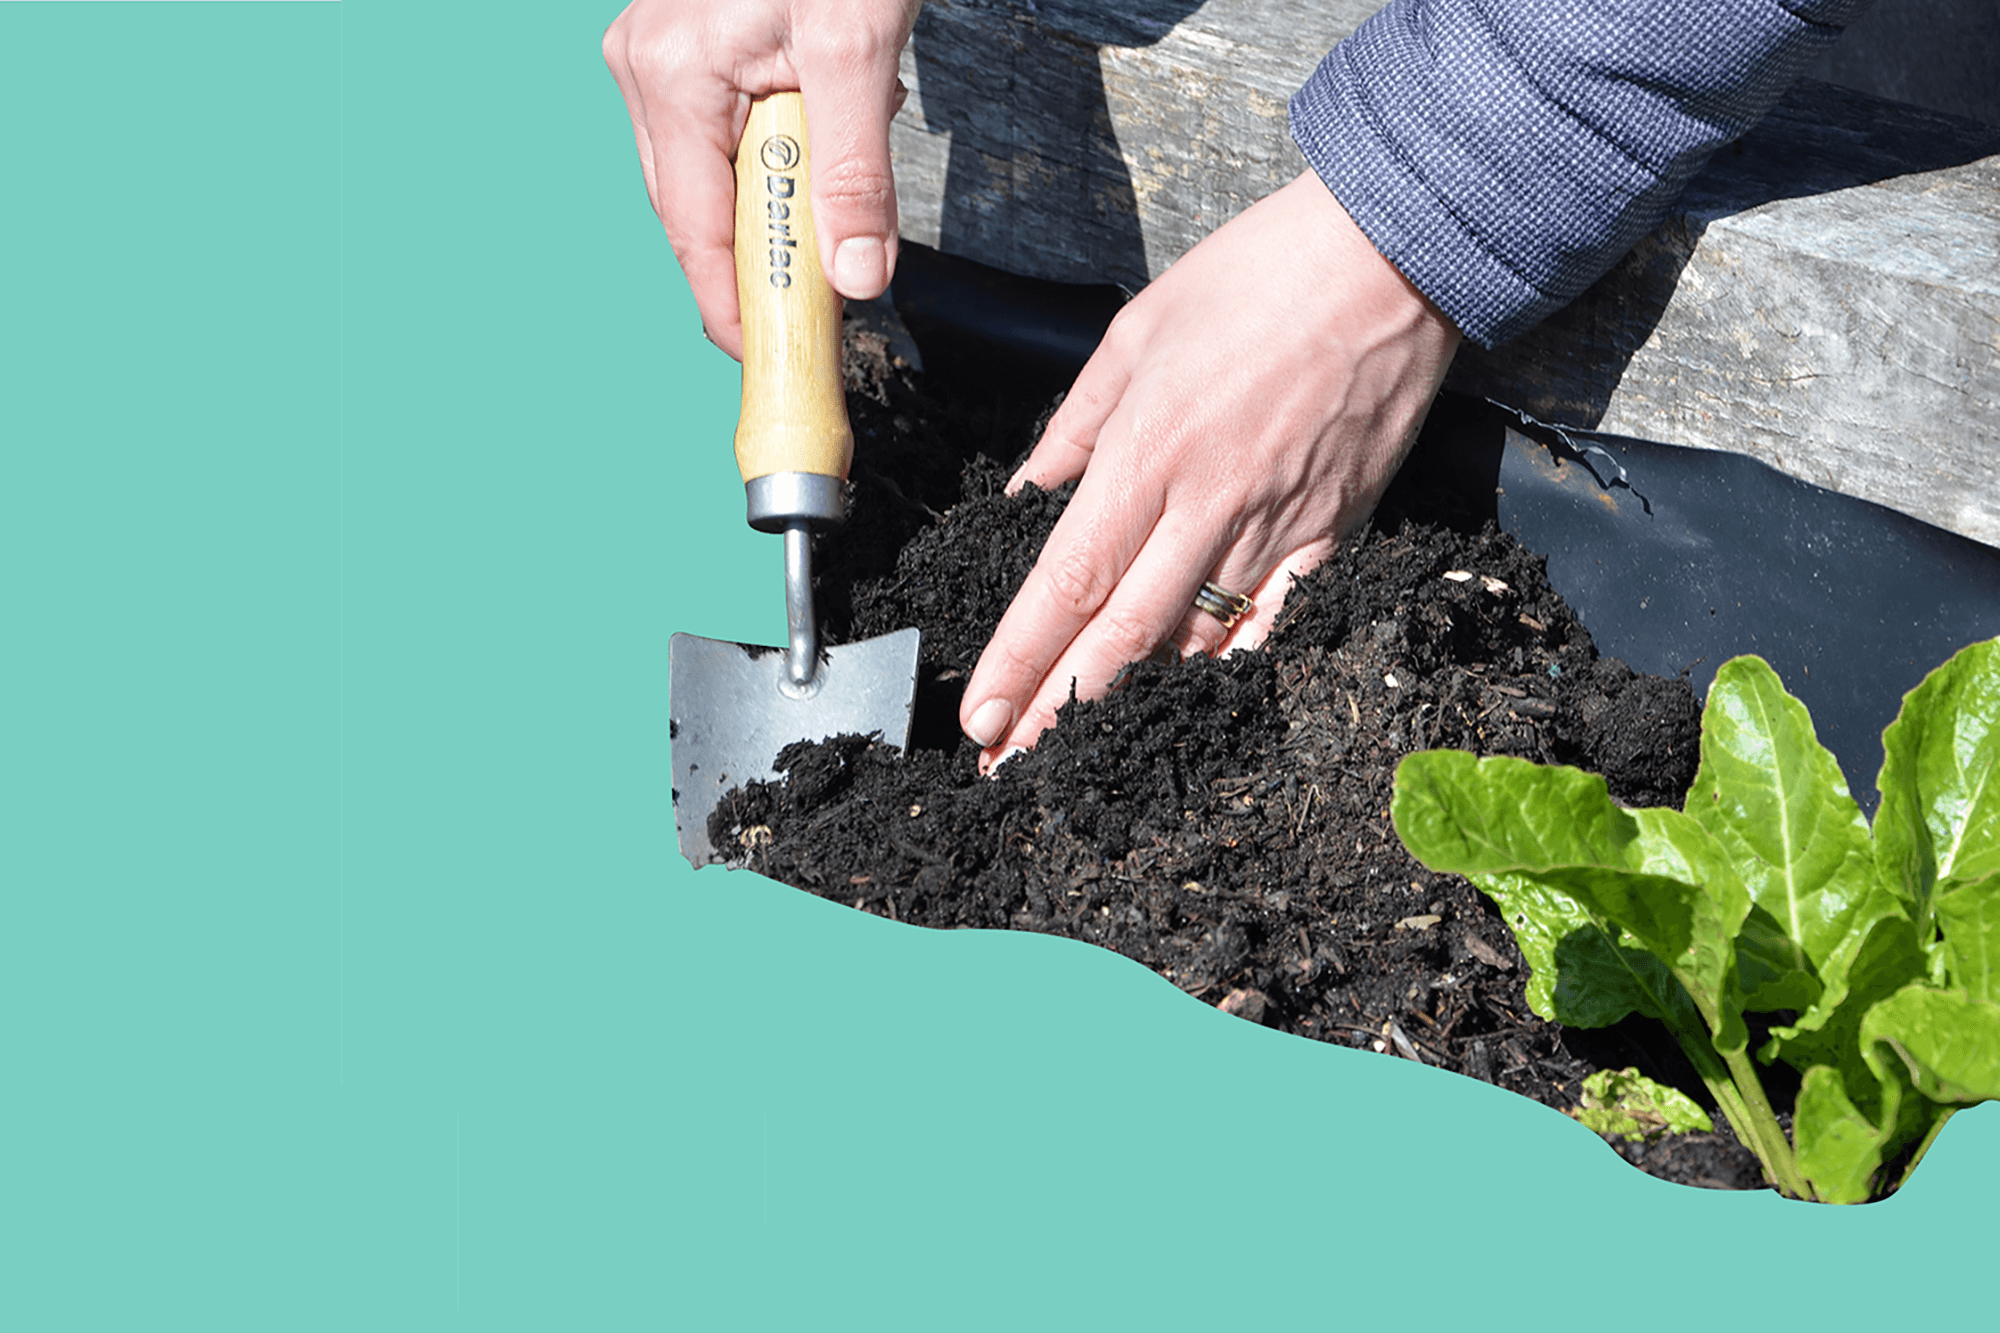 Hands digging in flower bed with a trowel against a pale blue background